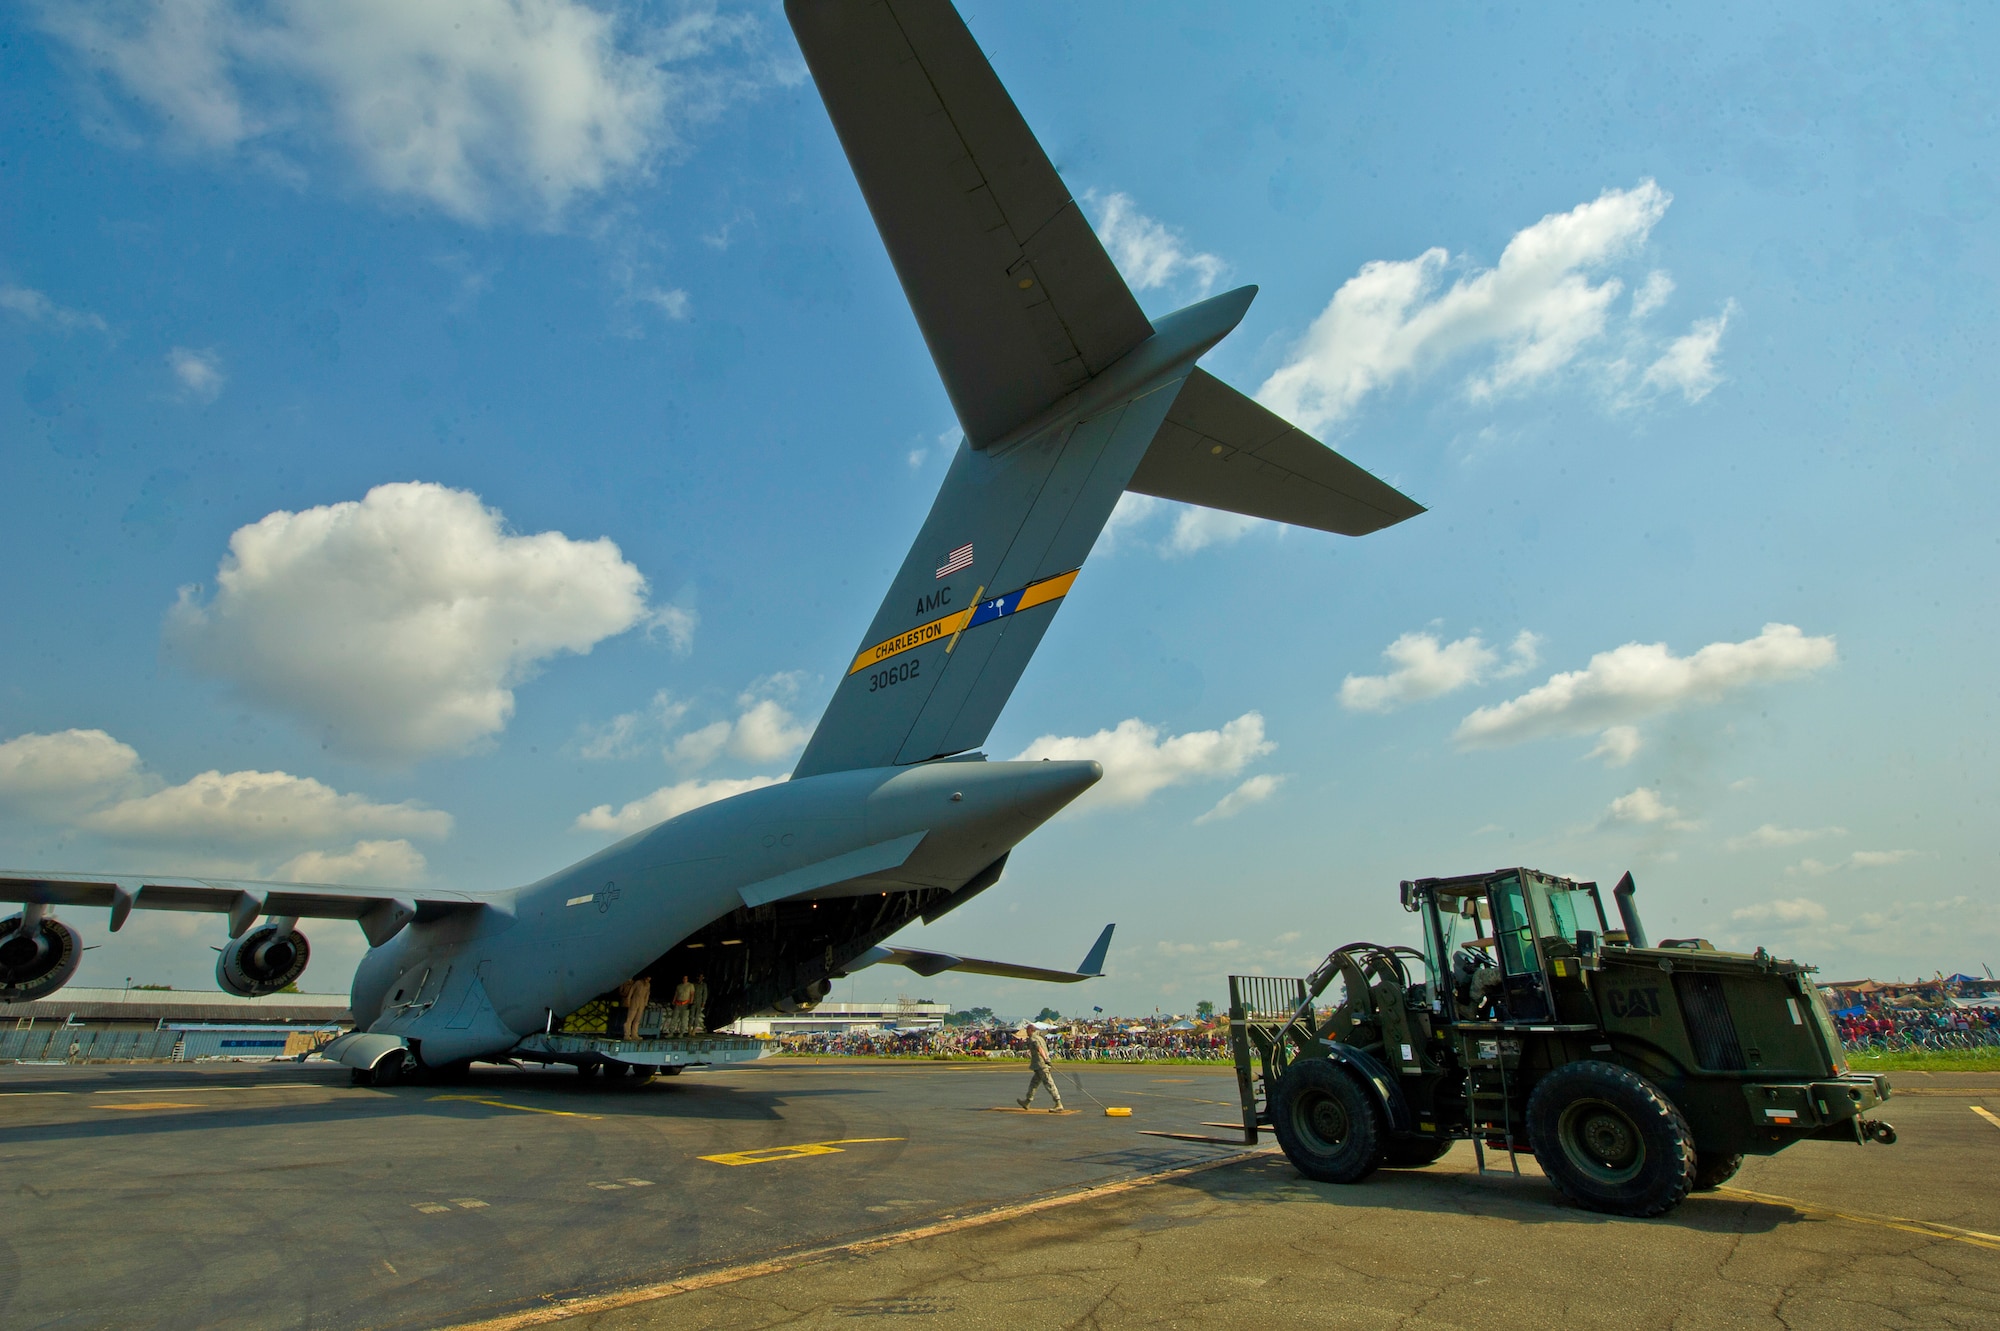 U.S. Air Force members unload cargo off a C-17 Globemaster Dec. 13, 2013 at Bangui Airport, Central Africa Republic. In coordination with the French military and African Union, the U.S. military provided airlift support to transport Burundi soldiers, food and supplies in the CAR. This support is aimed at enabling African forces to deploy promptly to prevent further spread of sectarian violence and restore security in CAR. (U.S. Air Force photo/Staff Sgt. Erik Cardenas)